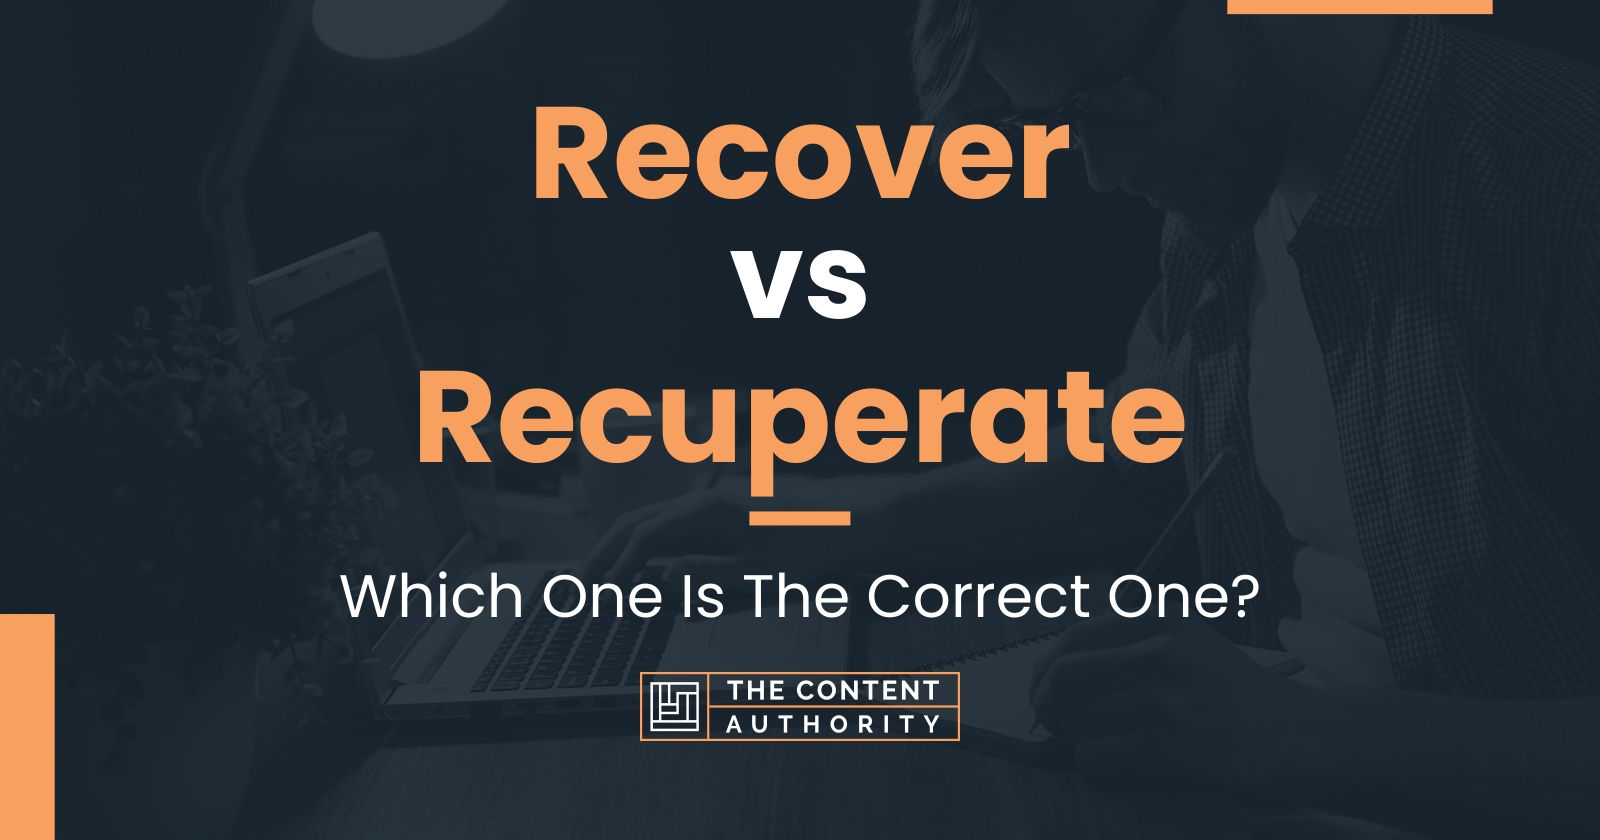 Recover vs Recuperate: Which One Is The Correct One?